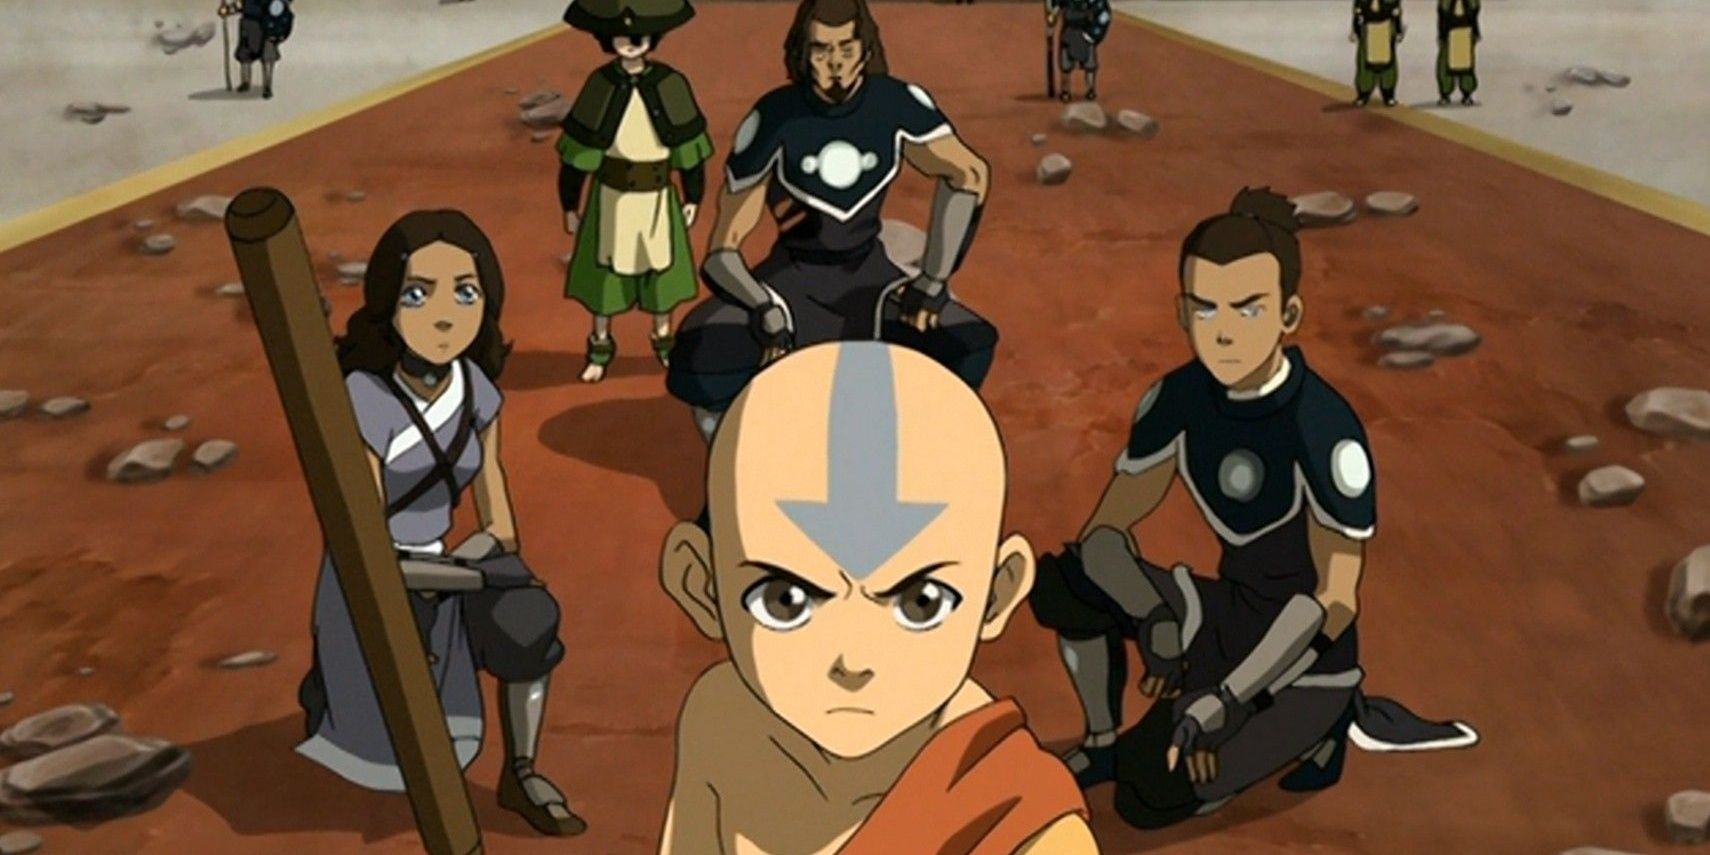 Heroes prepared to fight in Avatar